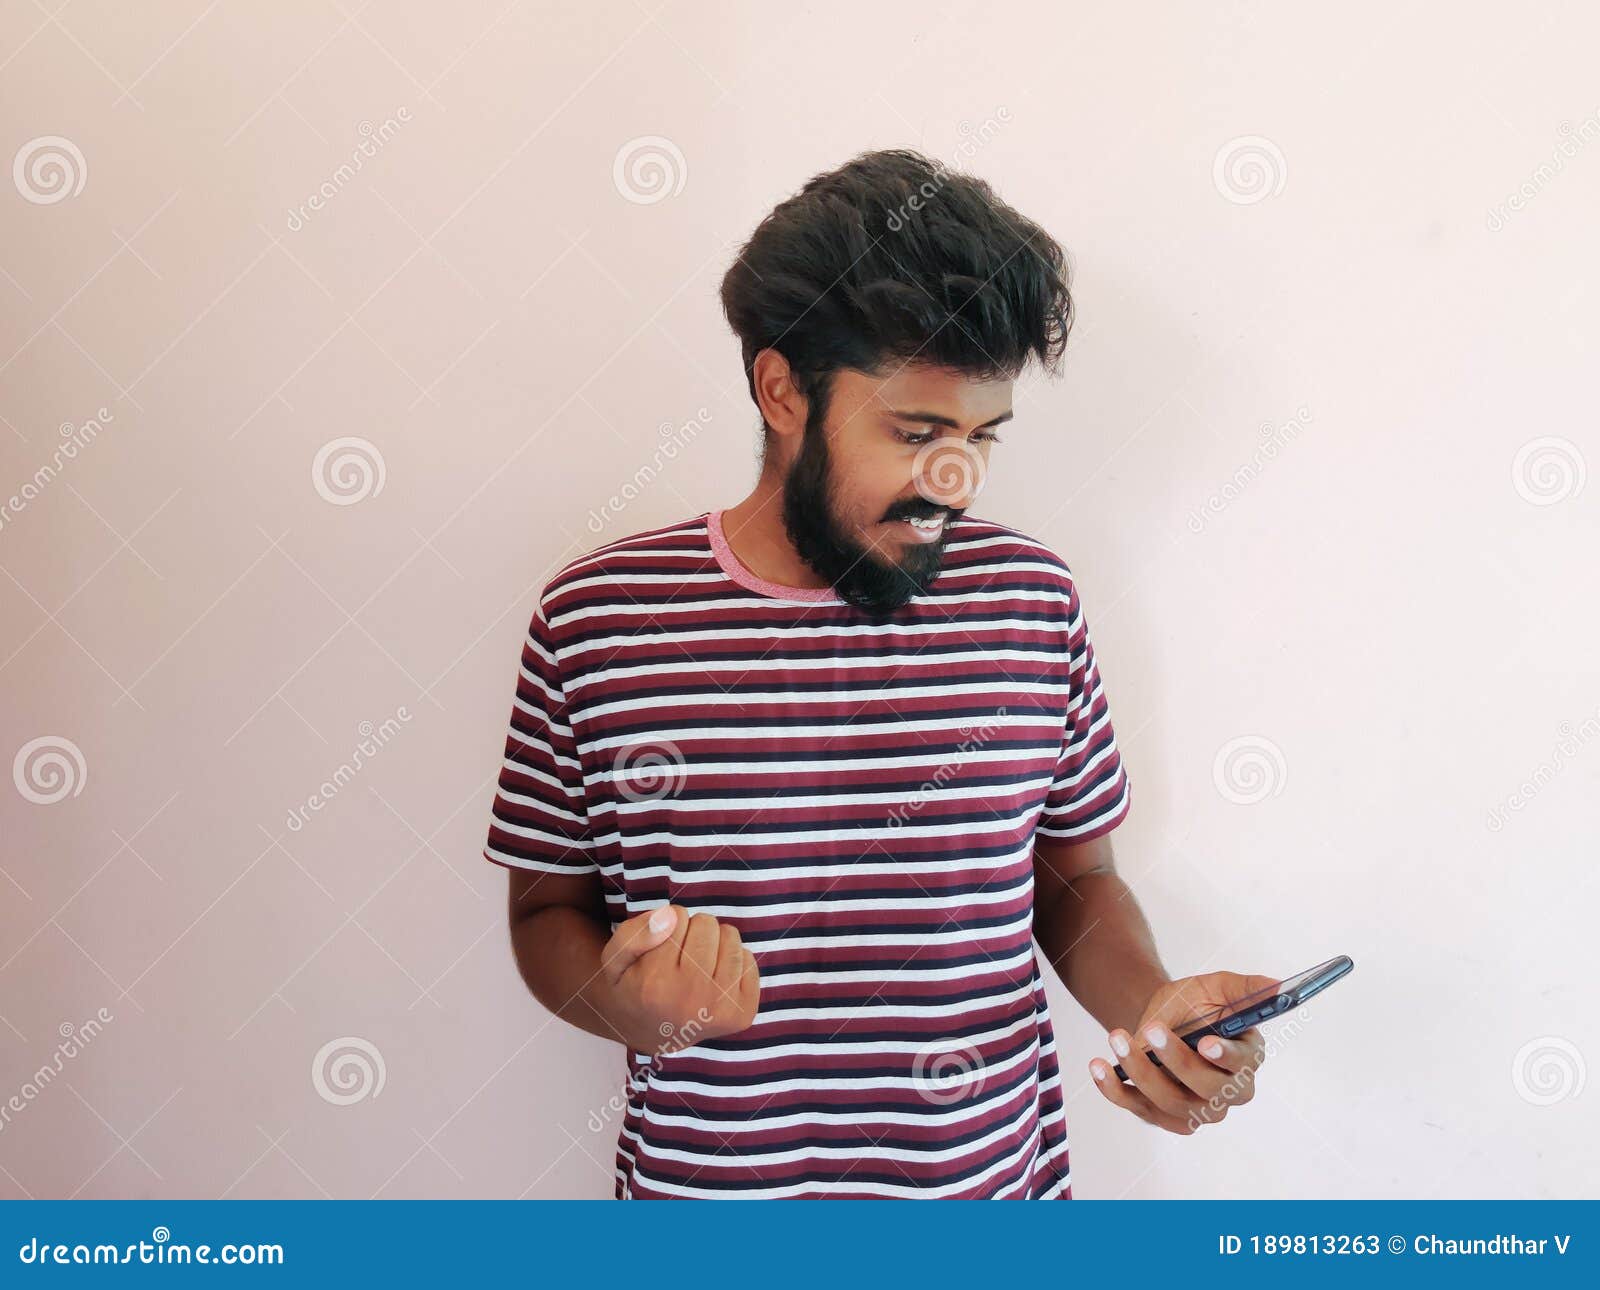 Indian Beard Man Looking at His Mobile Phone and Giving Reaction Stock ...